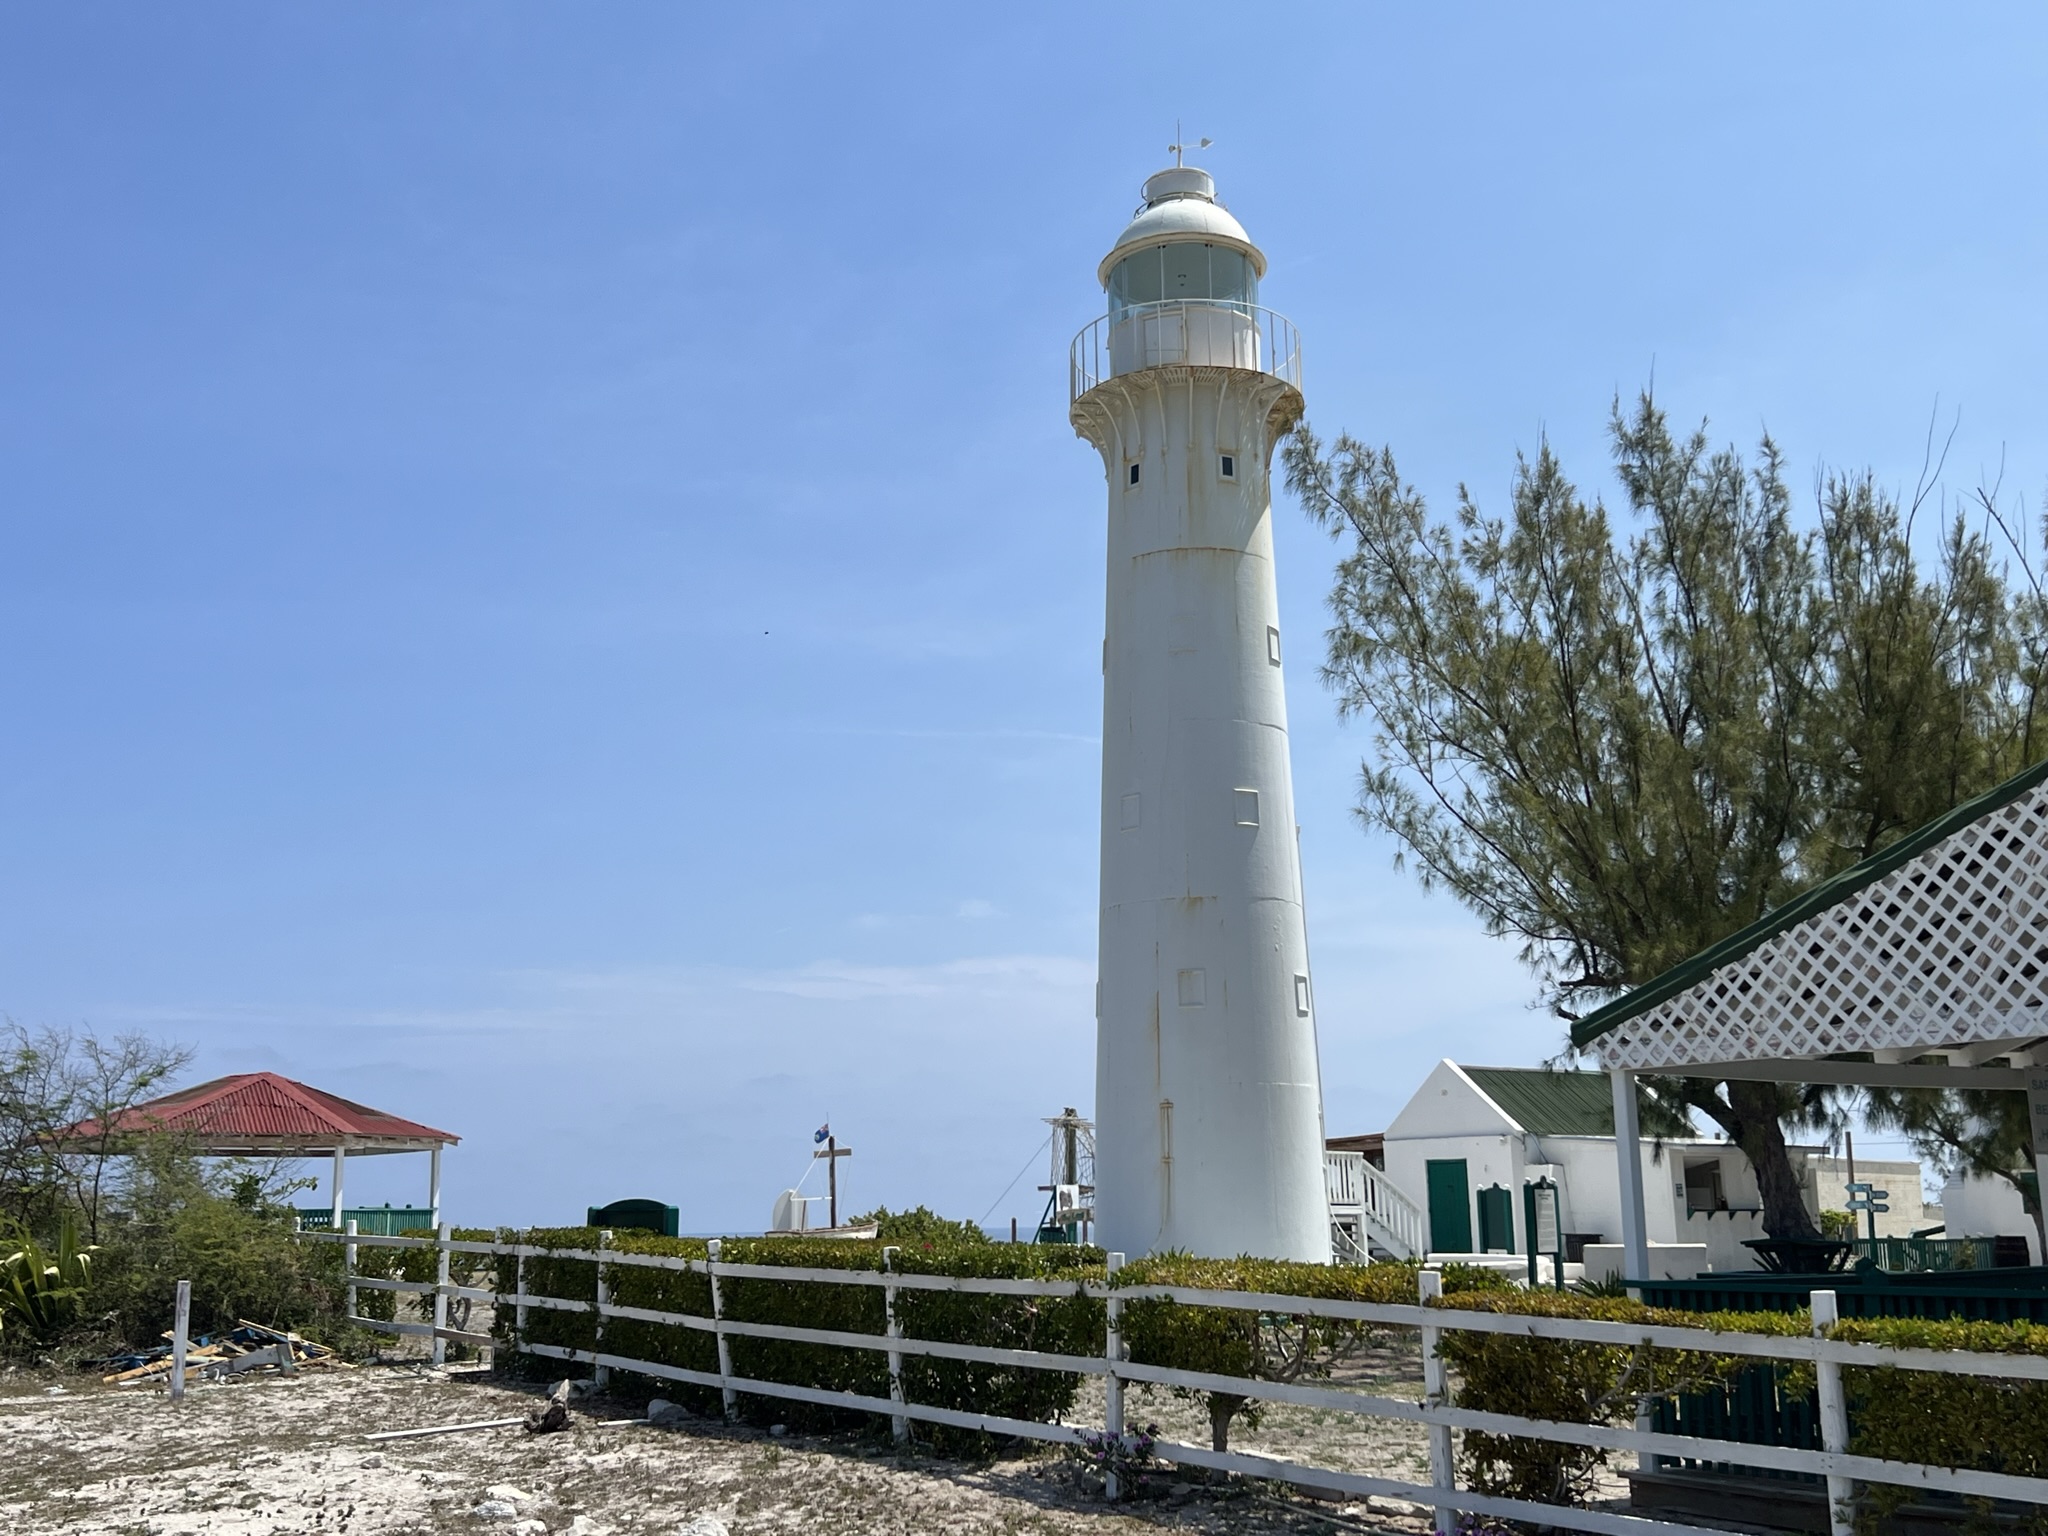 Cruise Shore Excursions – Grand Turk Tram Tour of Historic Grand Turk Island in the Turks and Caicos